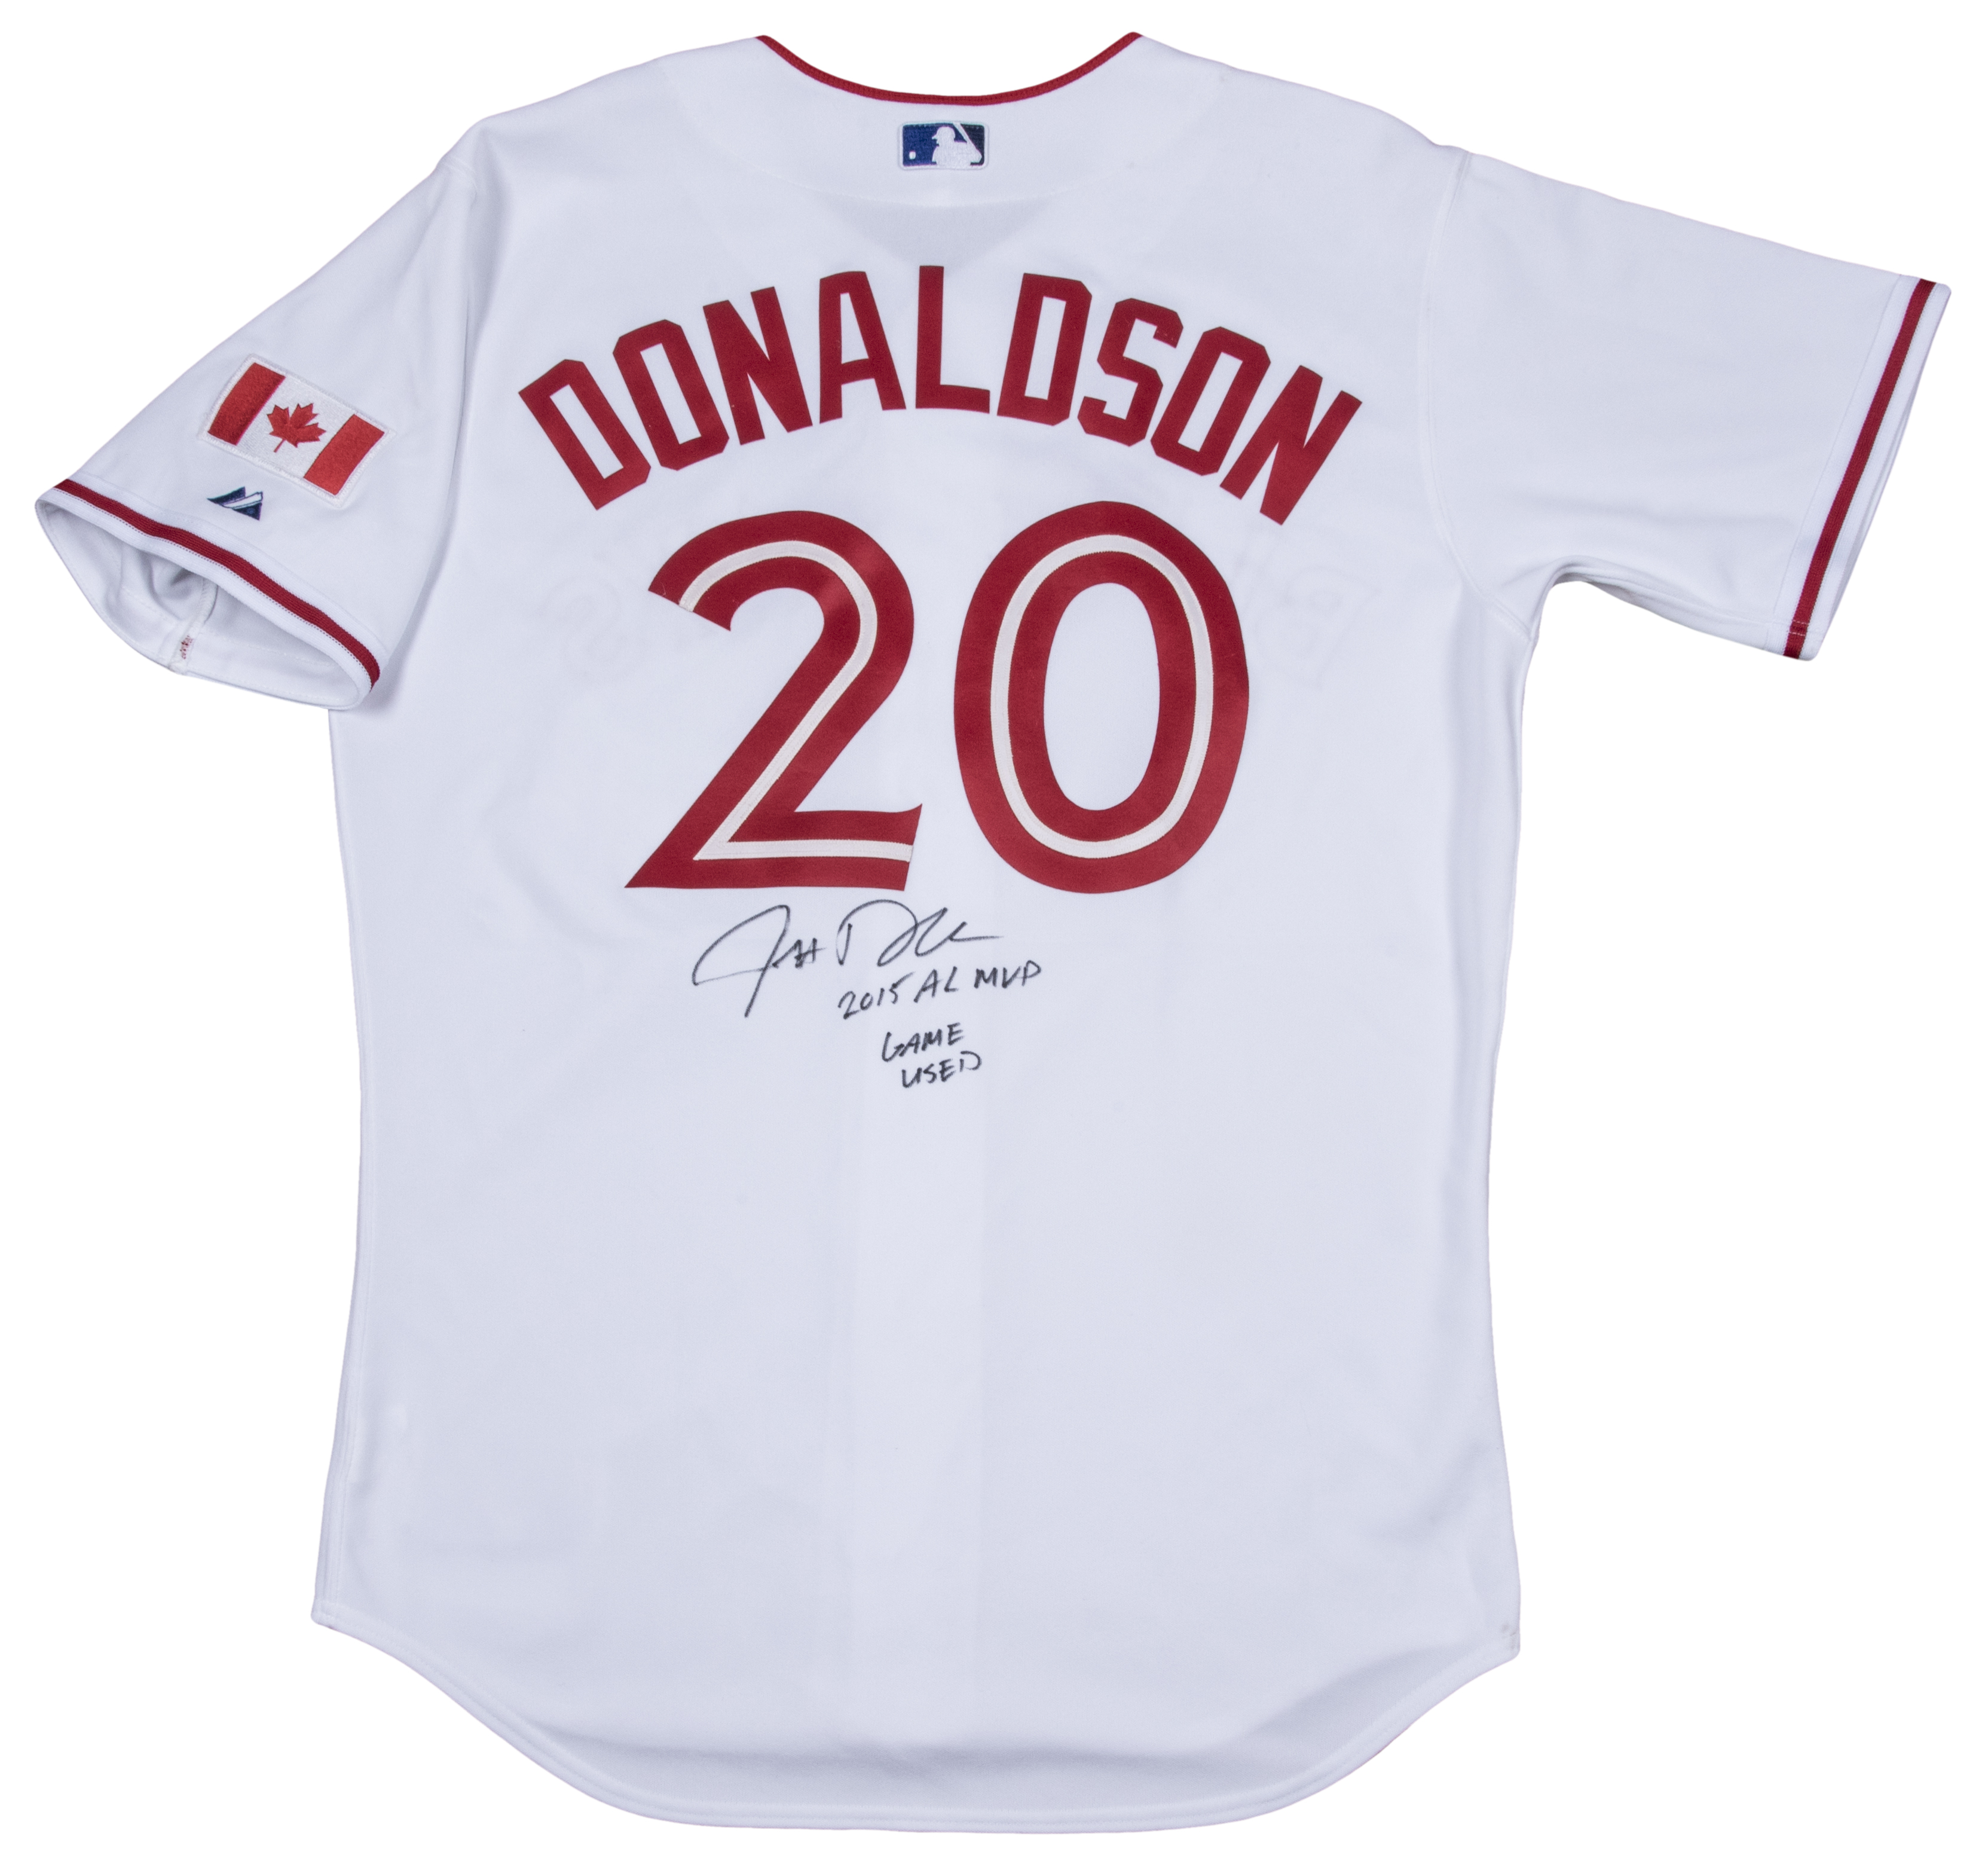 blue jays canada day jersey 2015